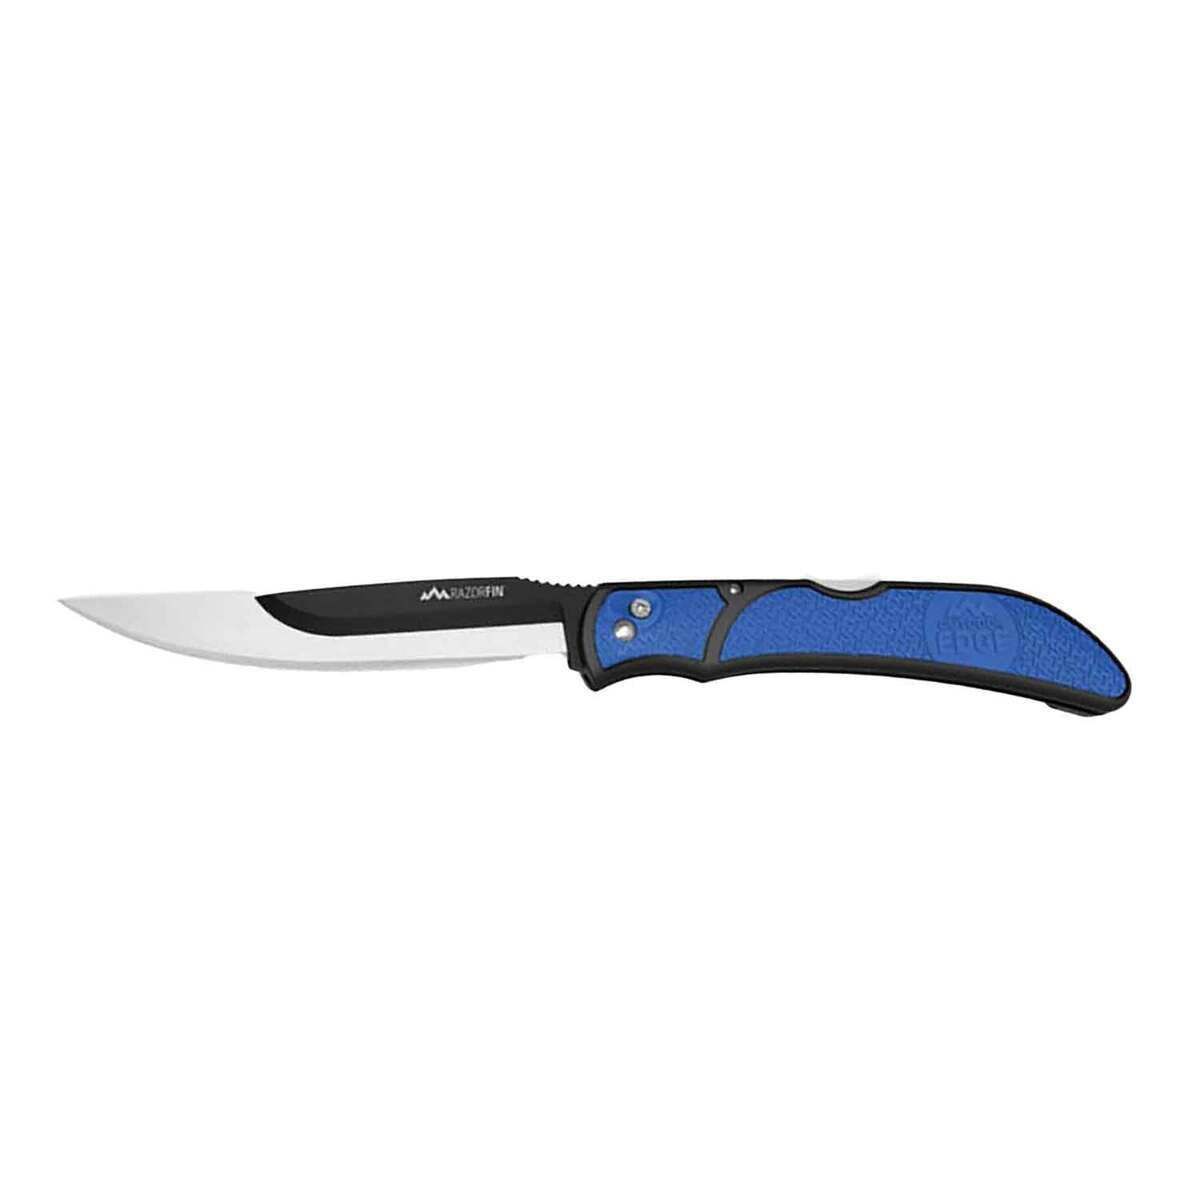 Lower Prices for Everyone Outdoor Edge RazorSafe 6-Blade Folding